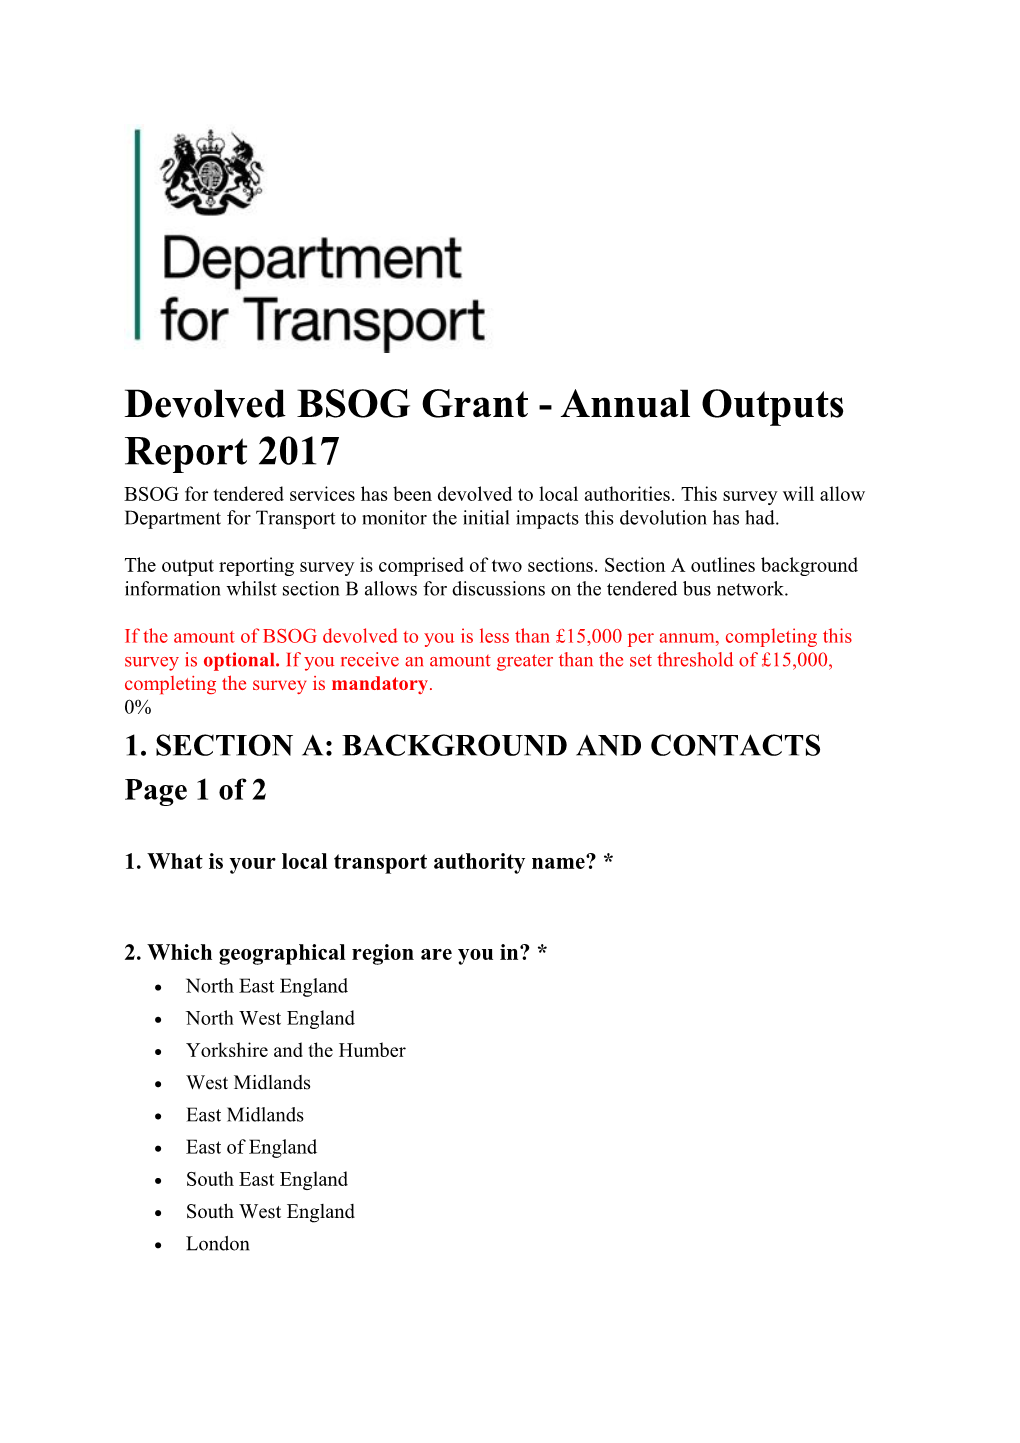 Devolved BSOG Grant - Annual Outputs Report 2017